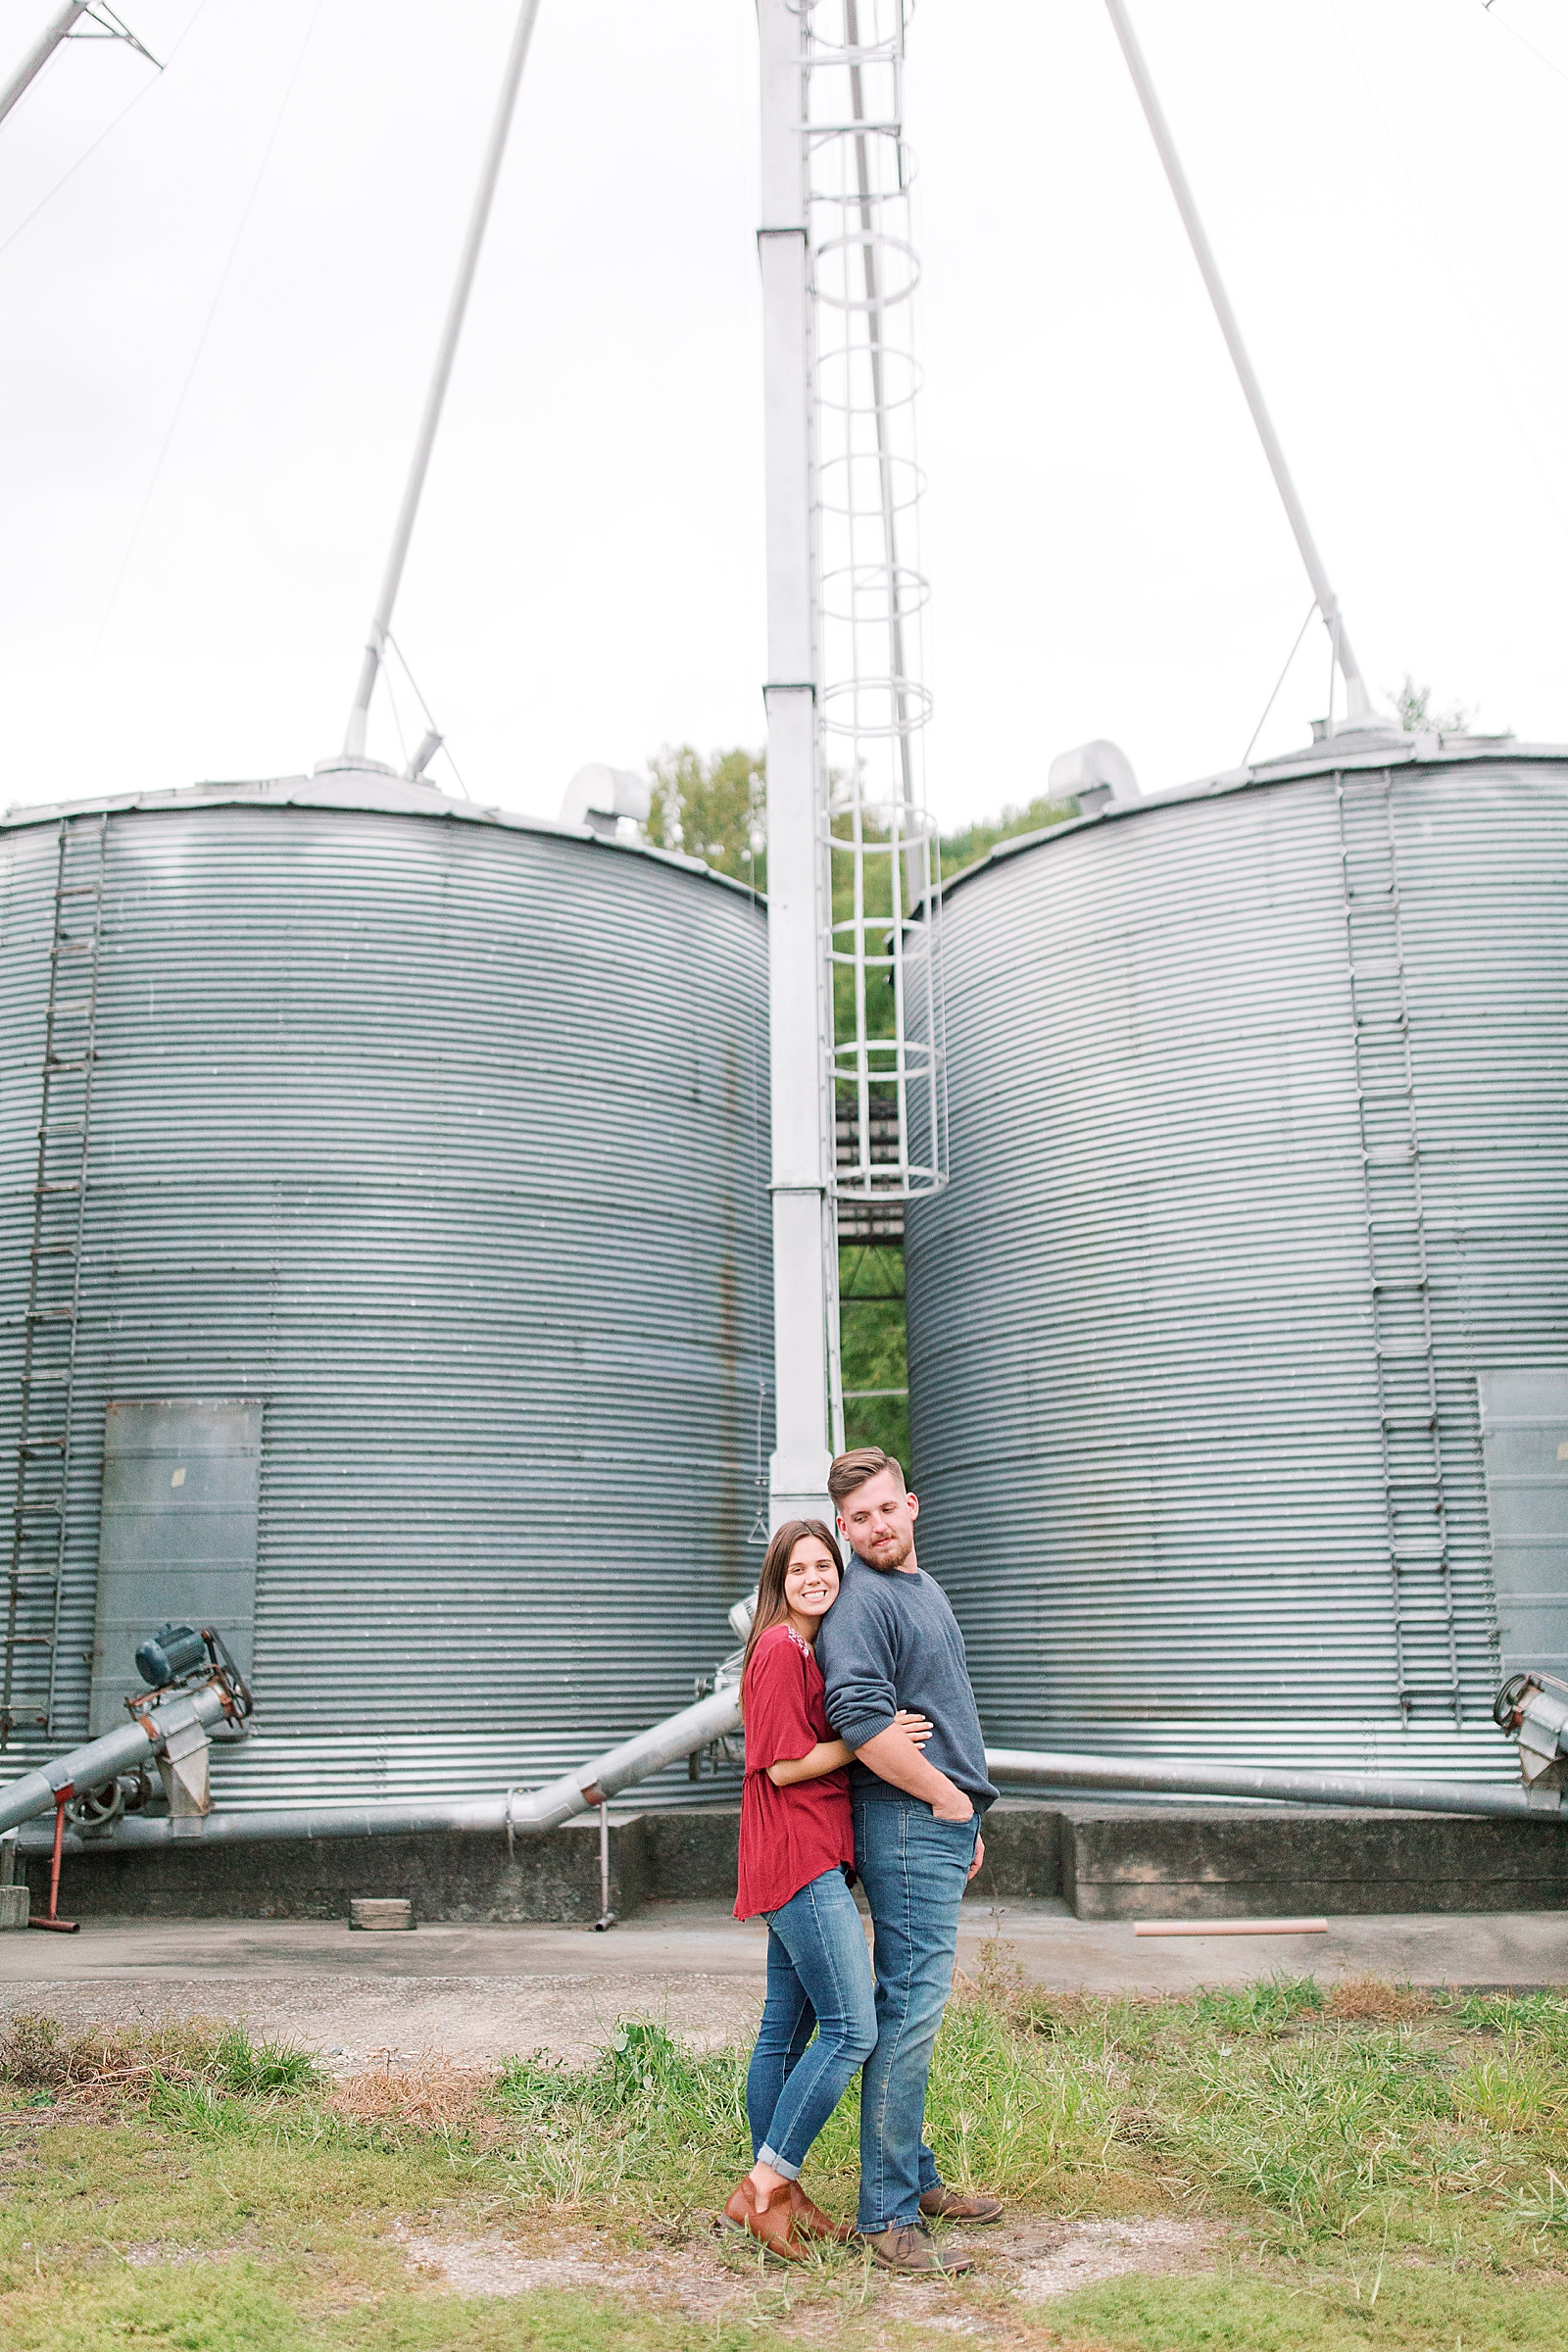  North Carolina Mountain Engagement Session Couple in front of Silos Photo